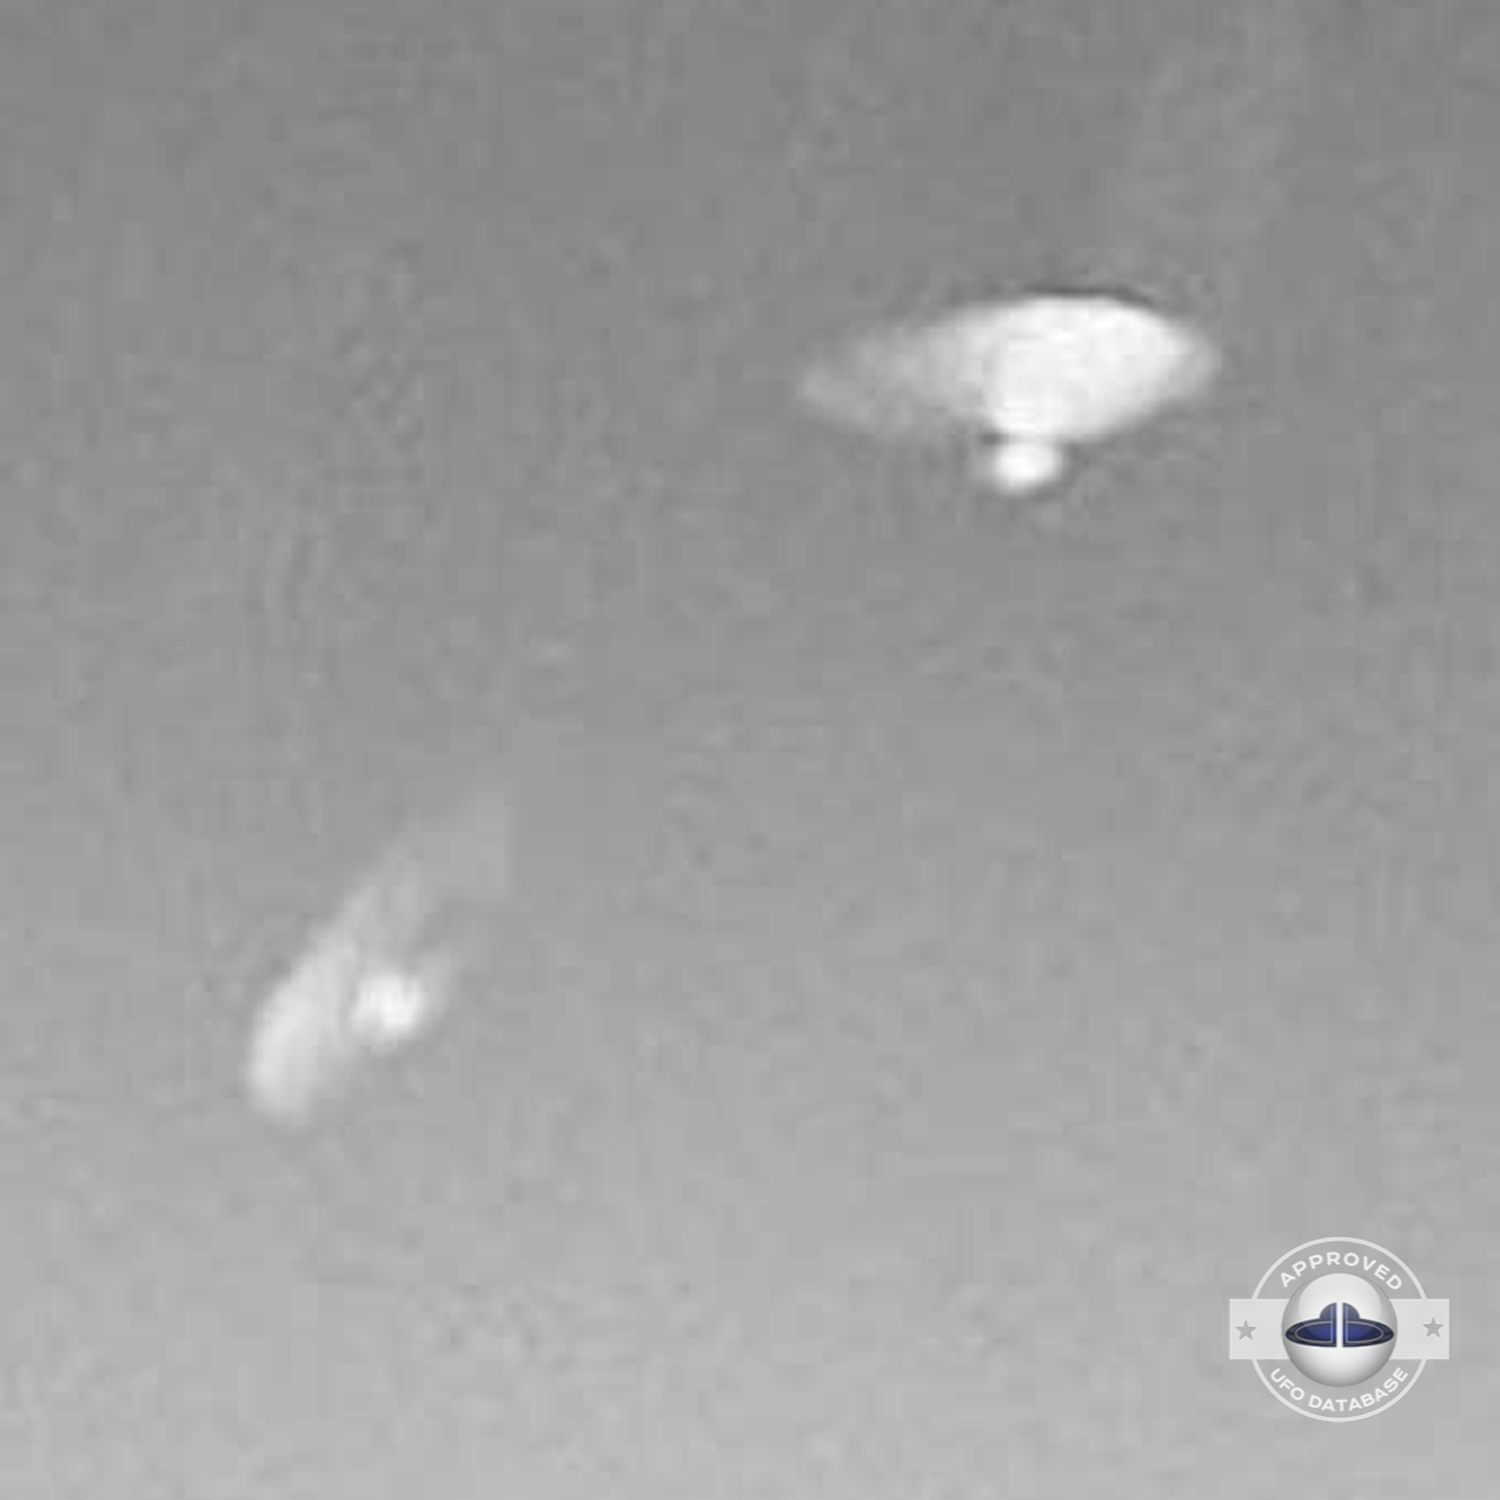 1954 One of the first UFO pictures ever taken in human history Italy UFO Picture #99-4